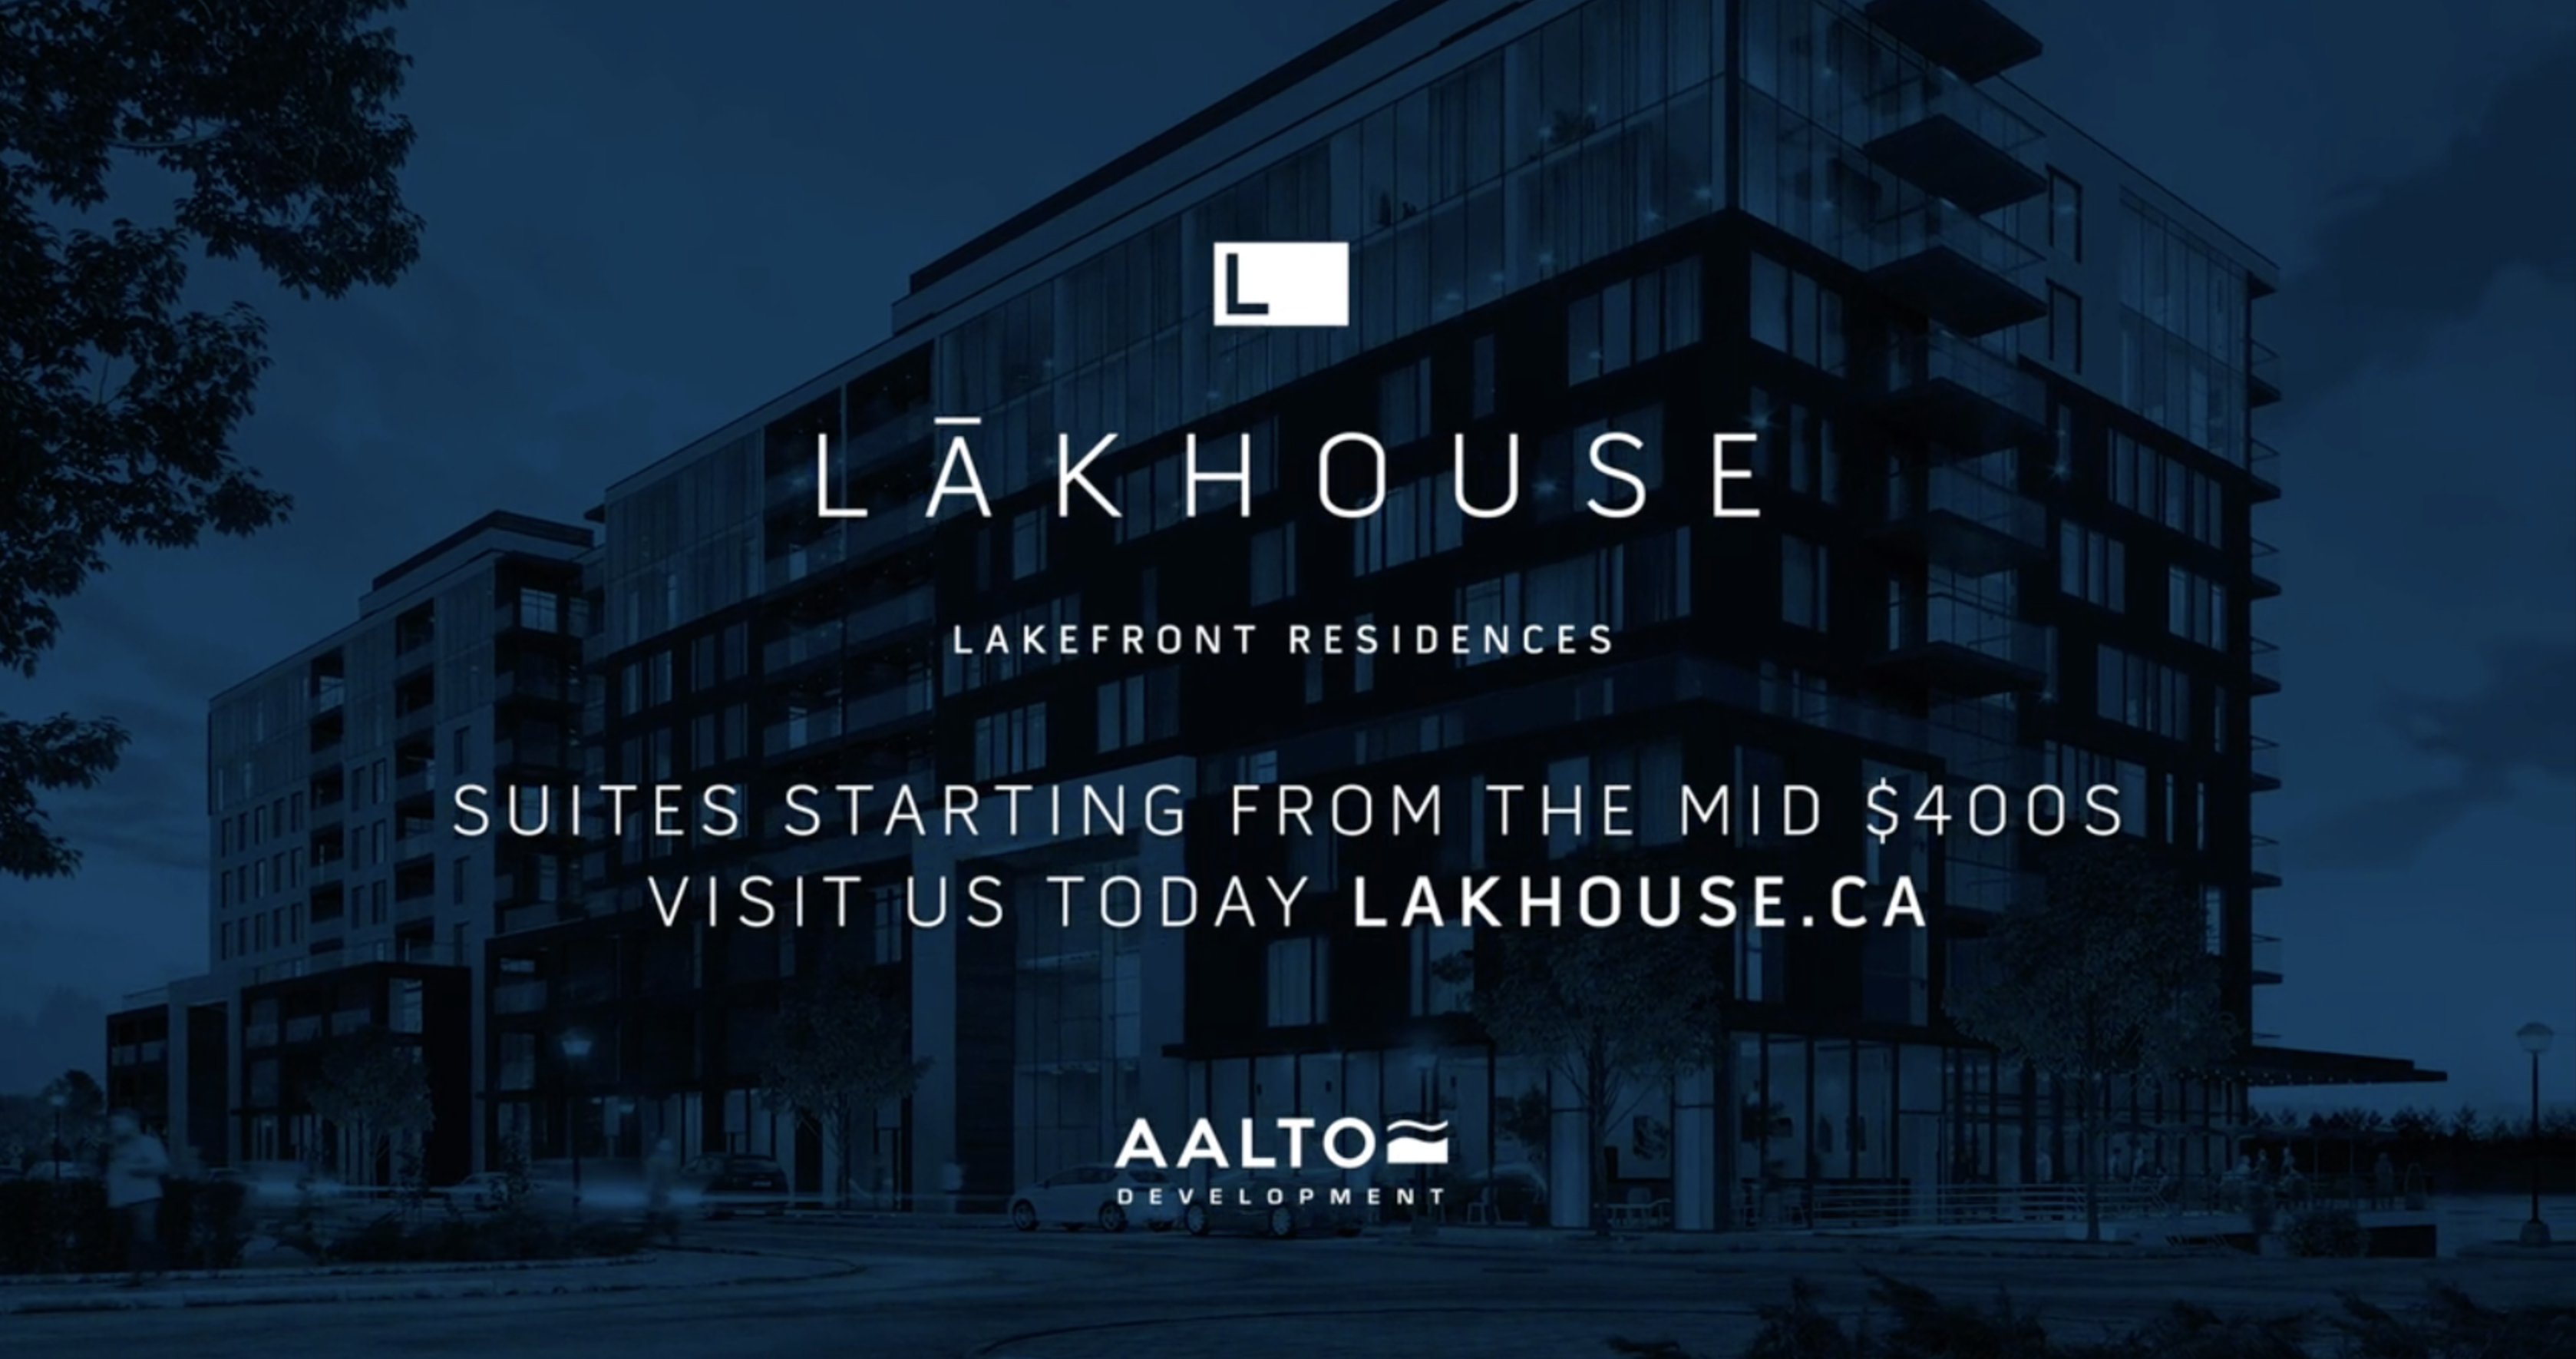 Discover the true luxury of resort-inspired residences at Lakhouse